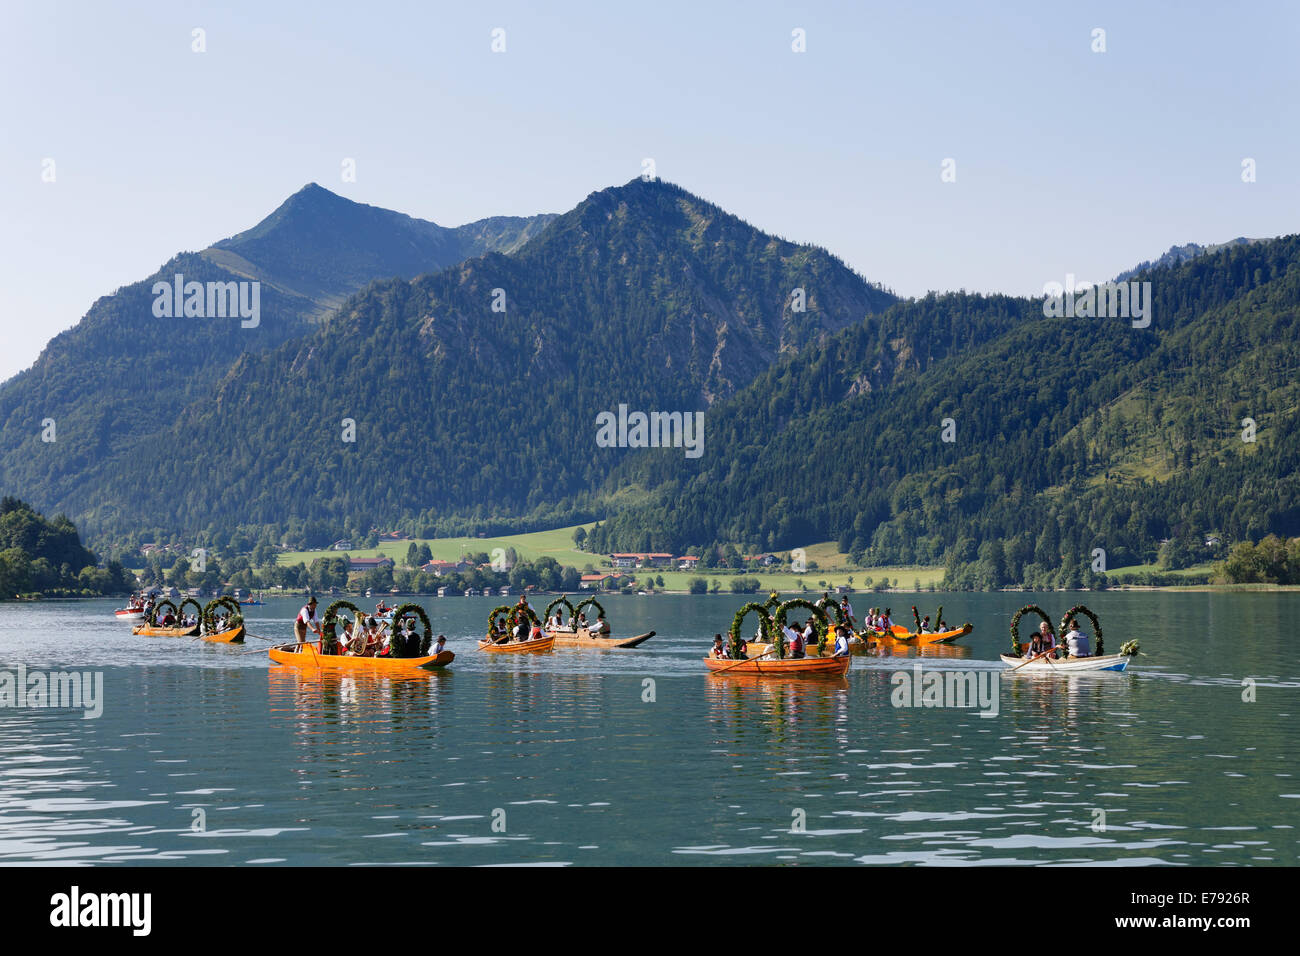 Locals wearing traditional costumes in decorated wooden Plätte boats, Brecherspitz mountain at the back, Stock Photo